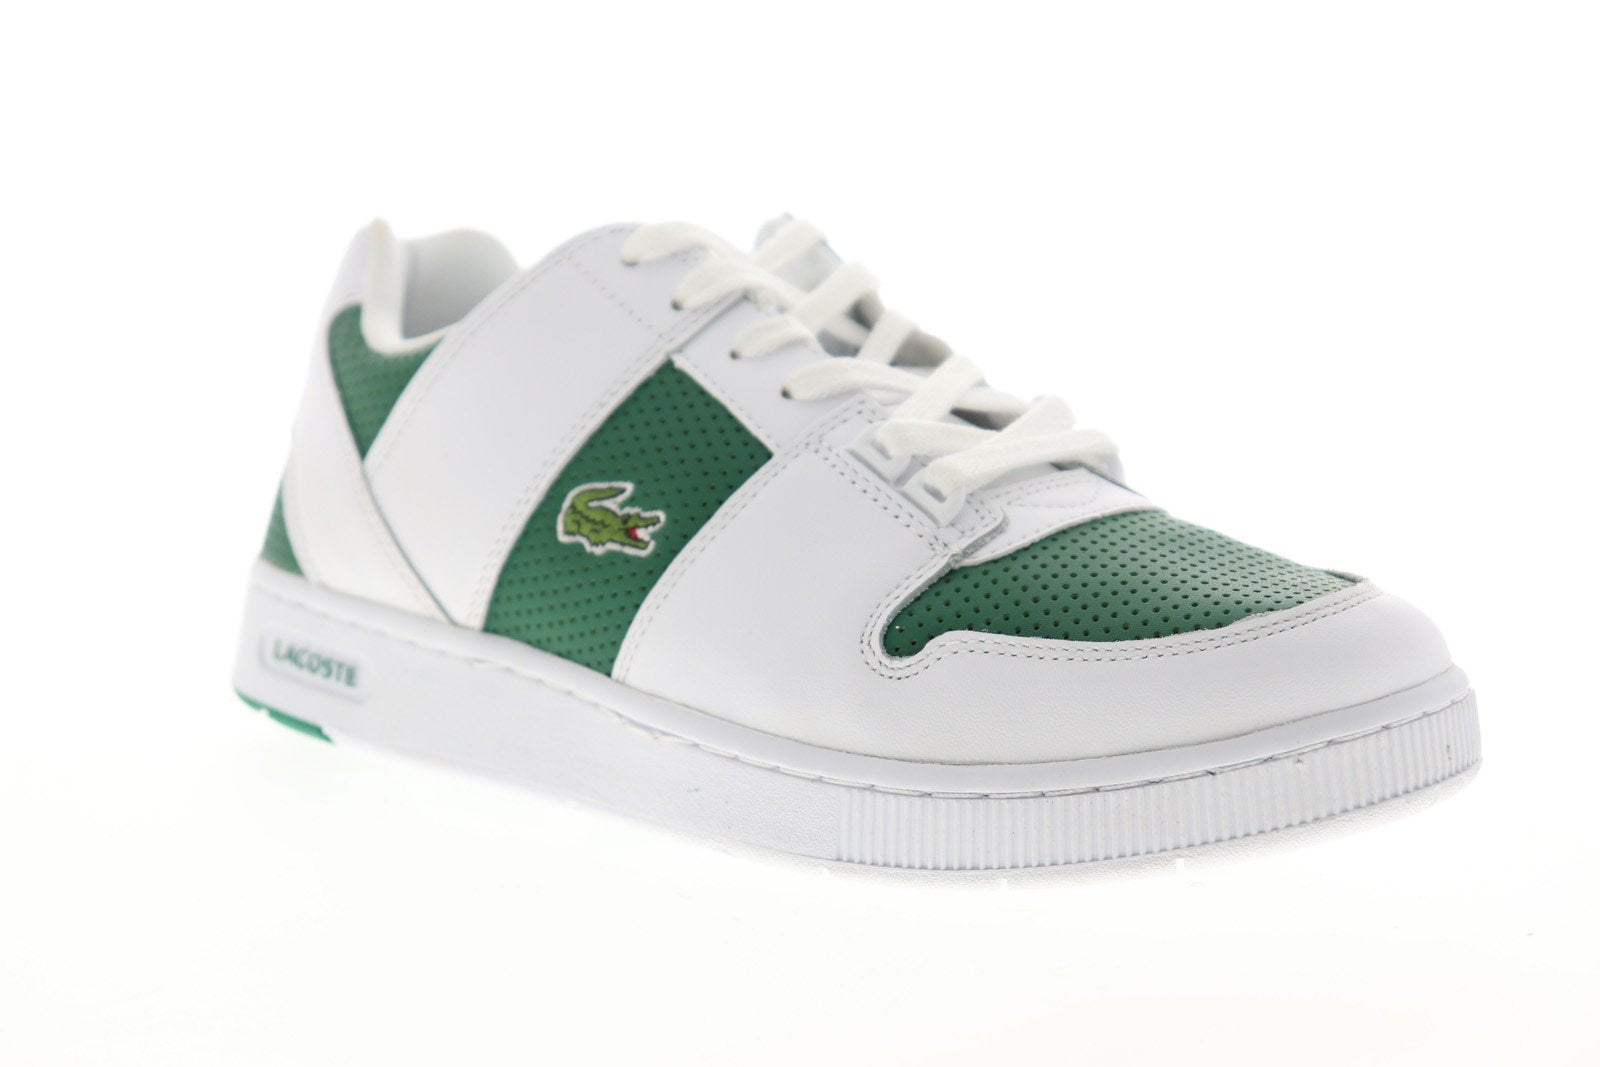 Lacoste Thrill 319 US SMA Mens White Lace Up Sneak - Ruze Shoes